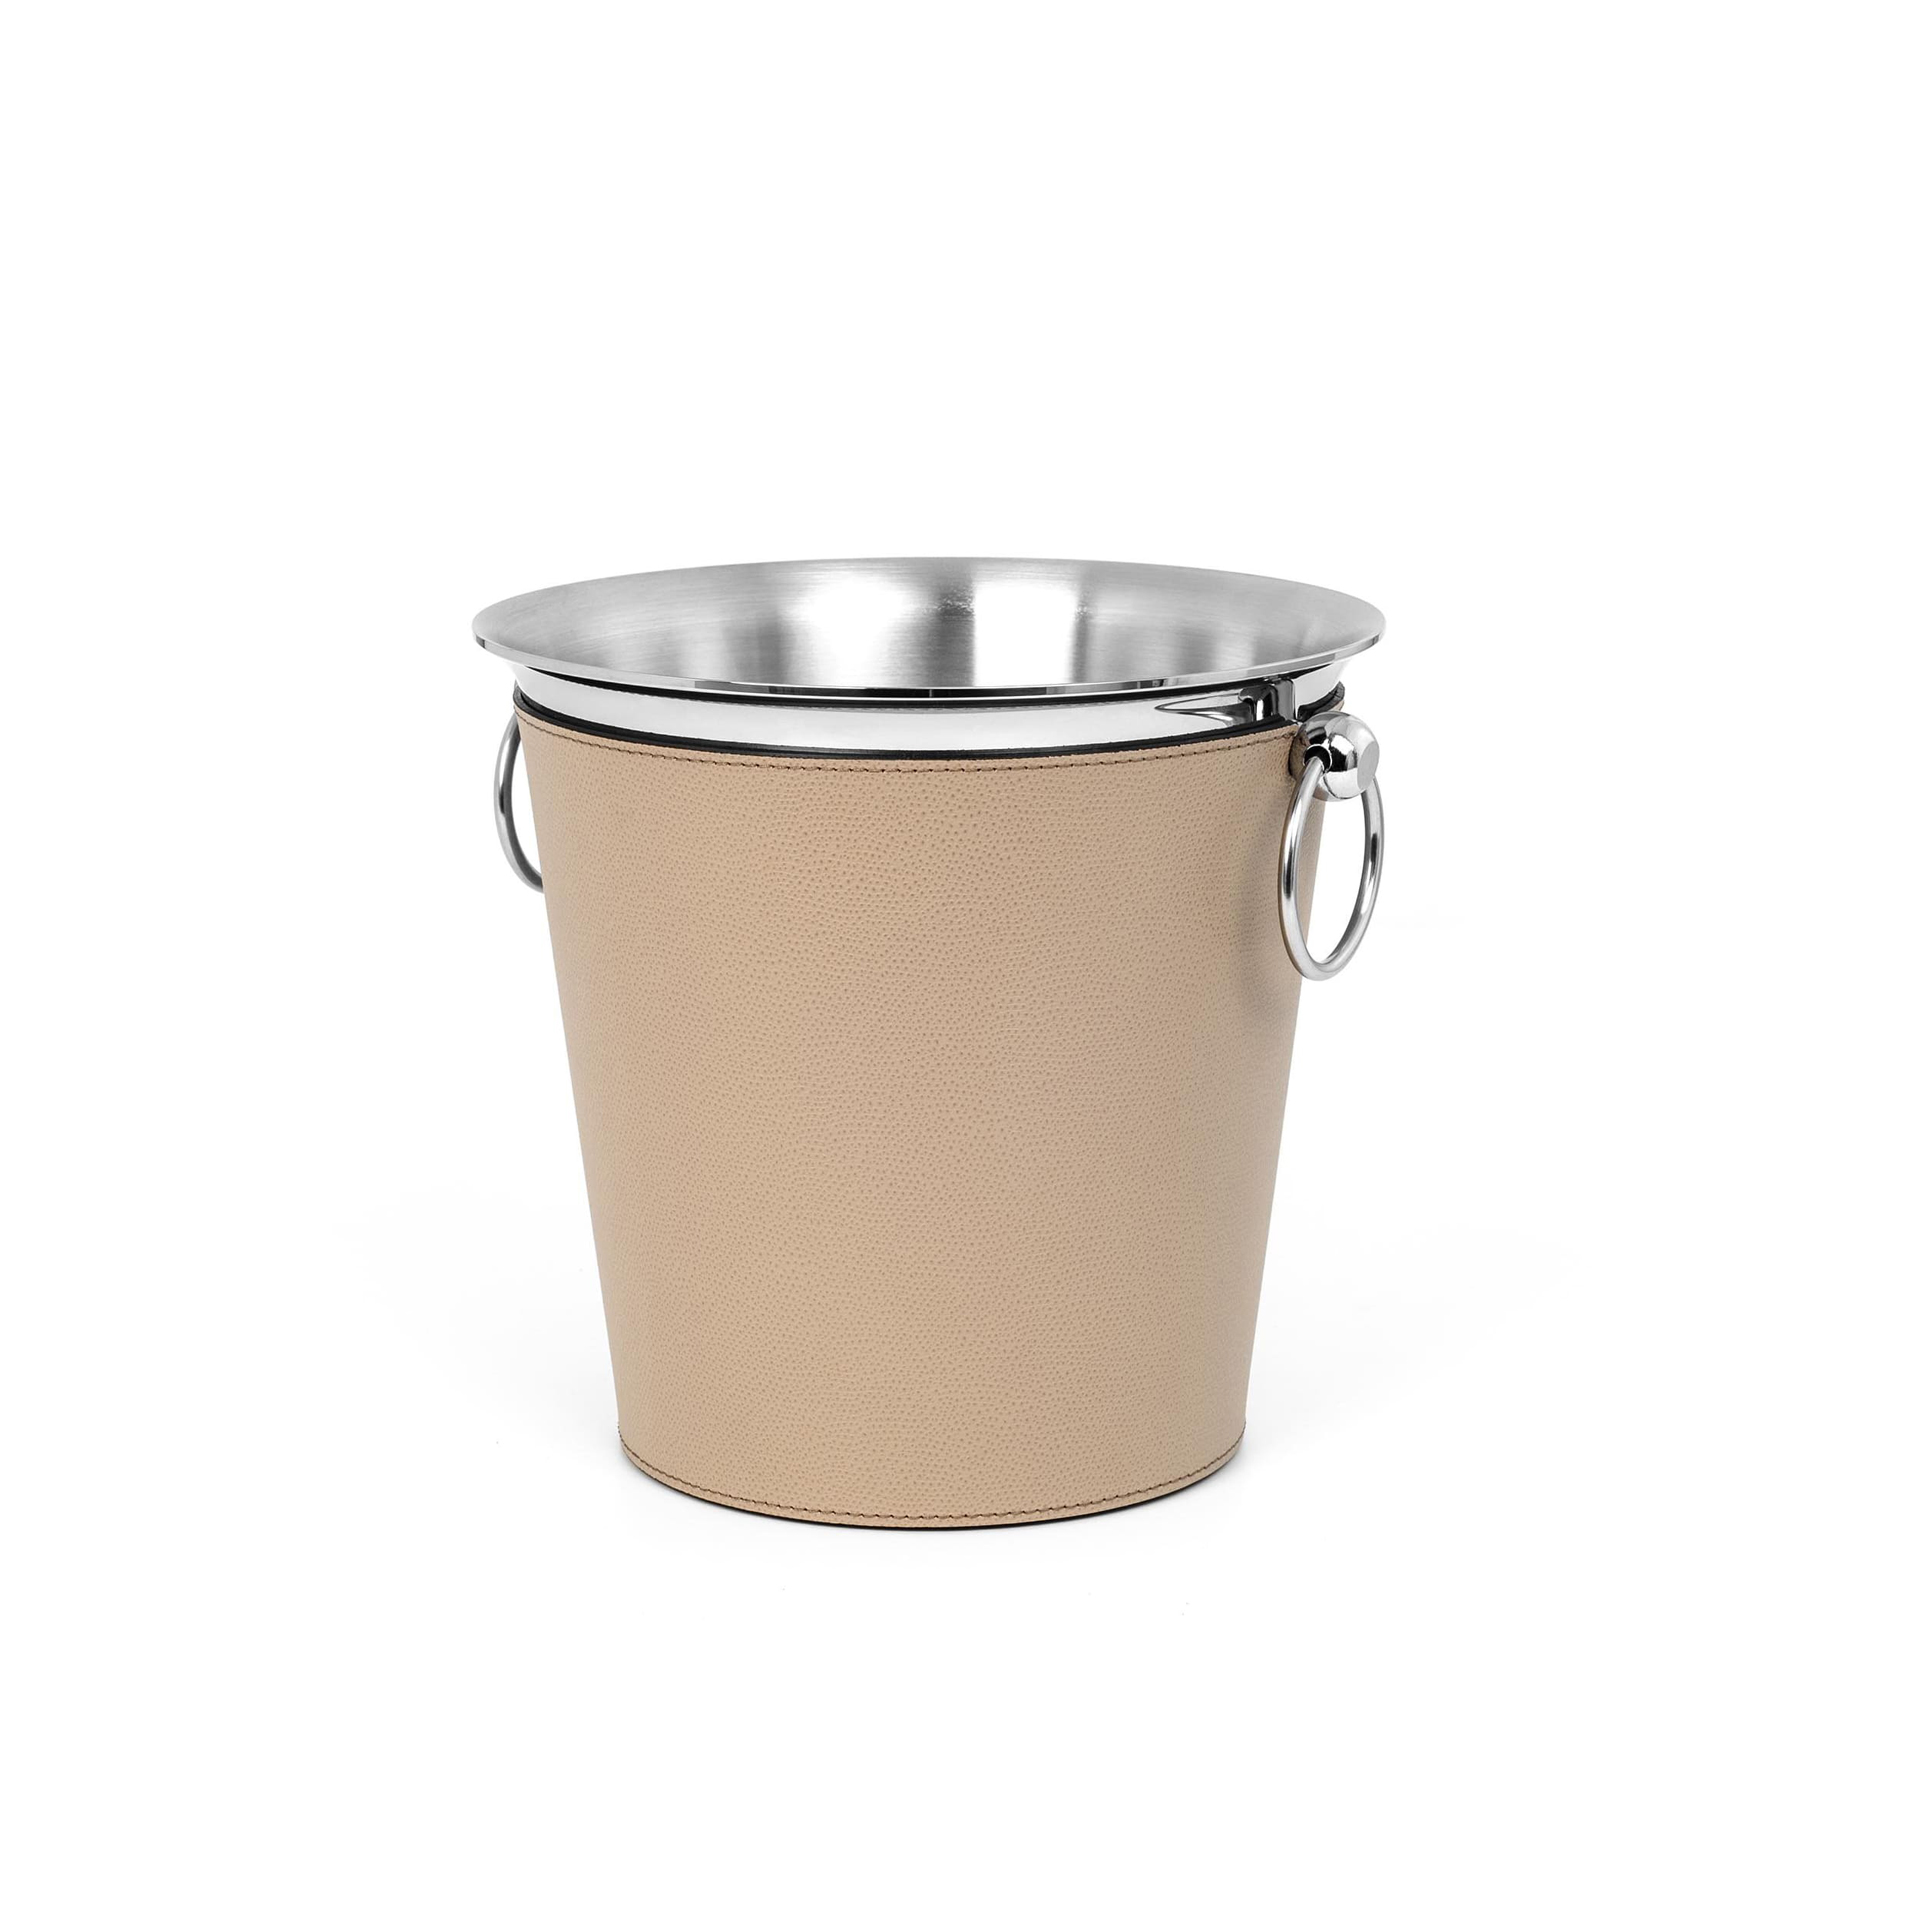 Liverpool leather champagne bucket Taupe 21 cm Pinetti